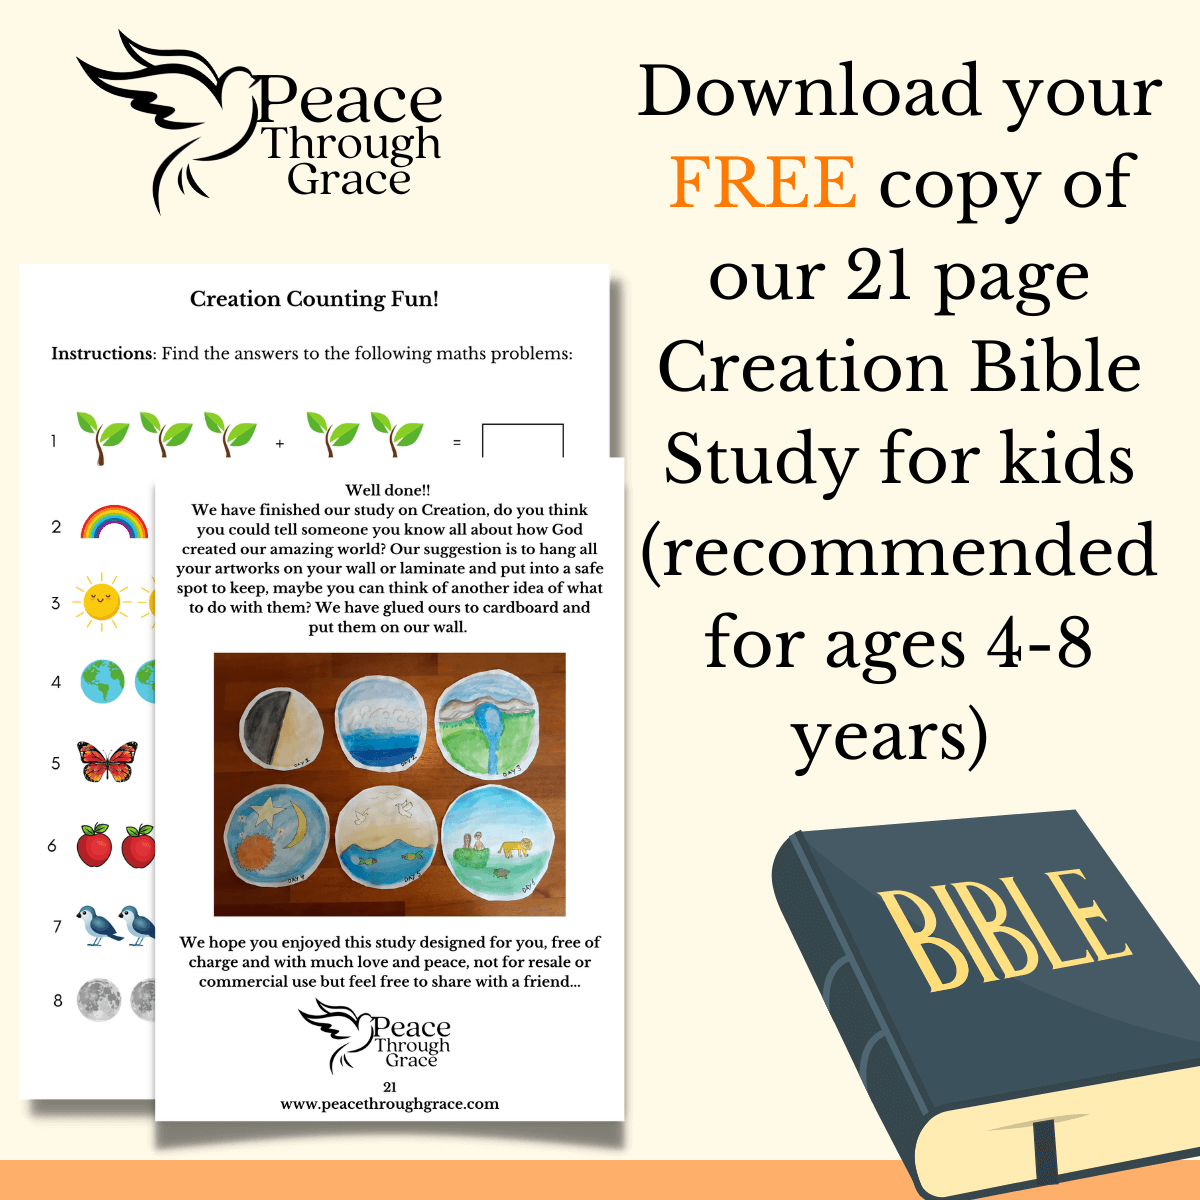 We have a free creation study for download, 21 pages of fun learning about God creating our beautiful world